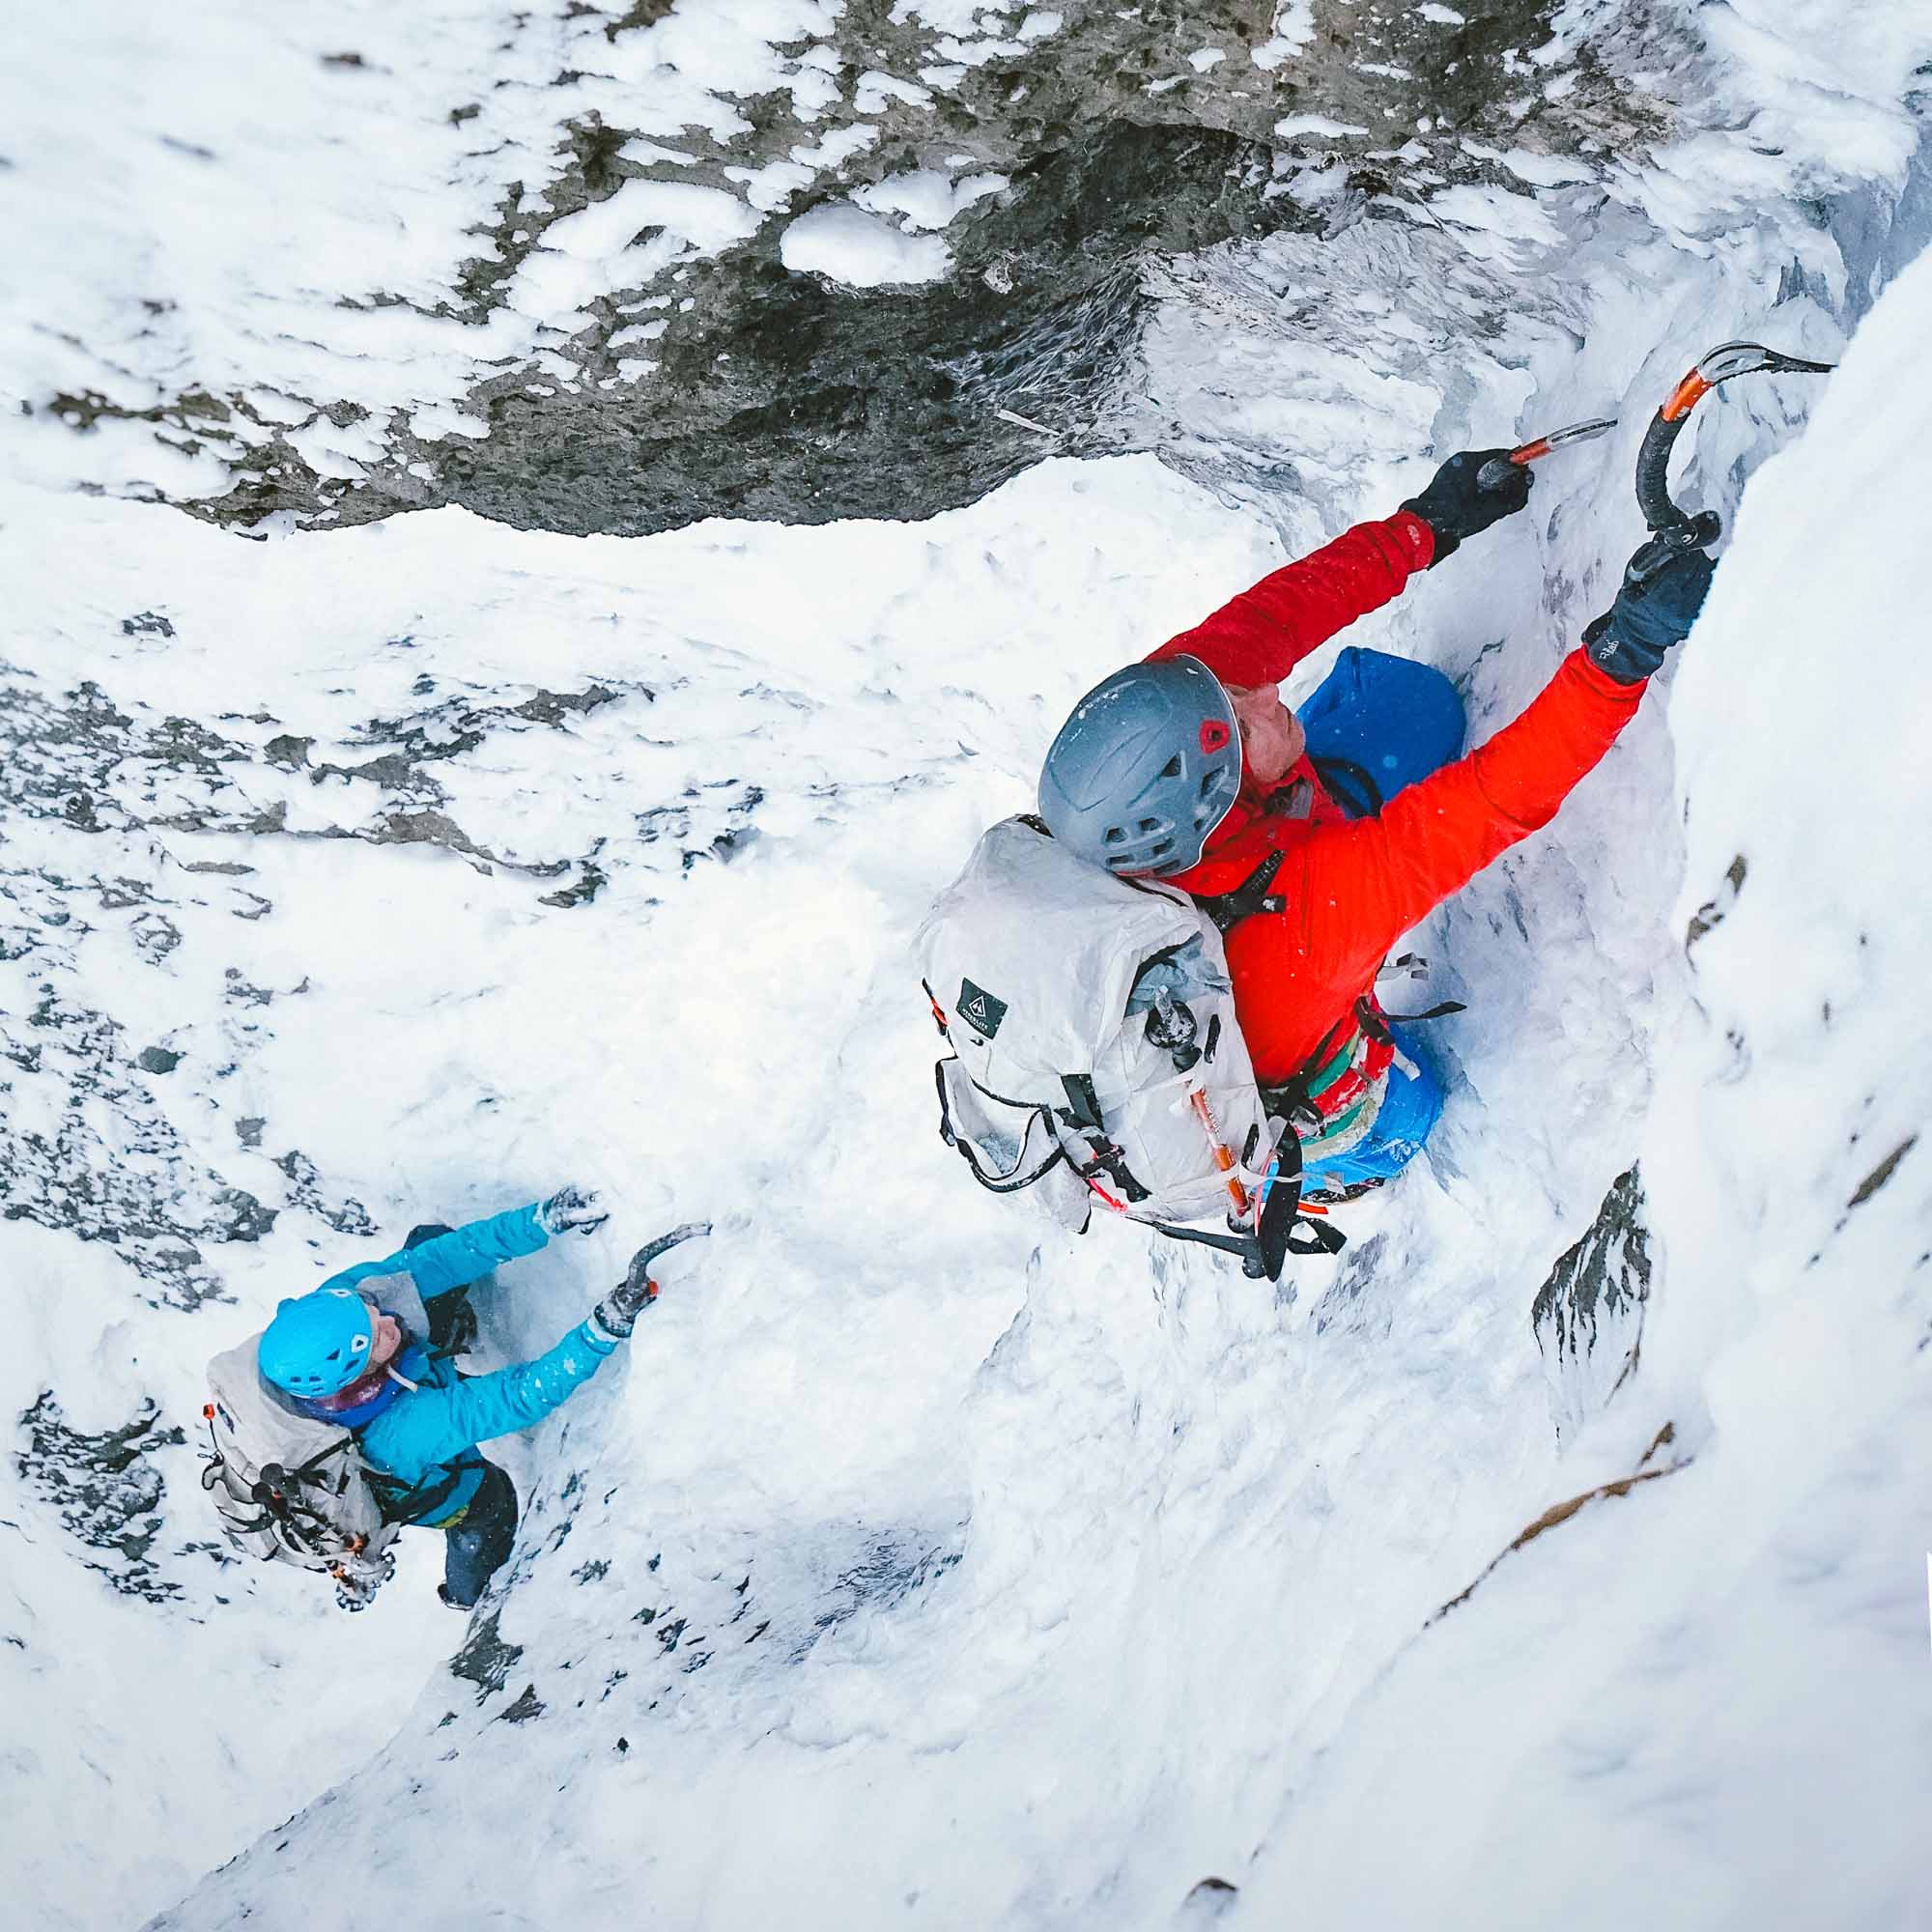 Two people climbing up a snowy cliff.